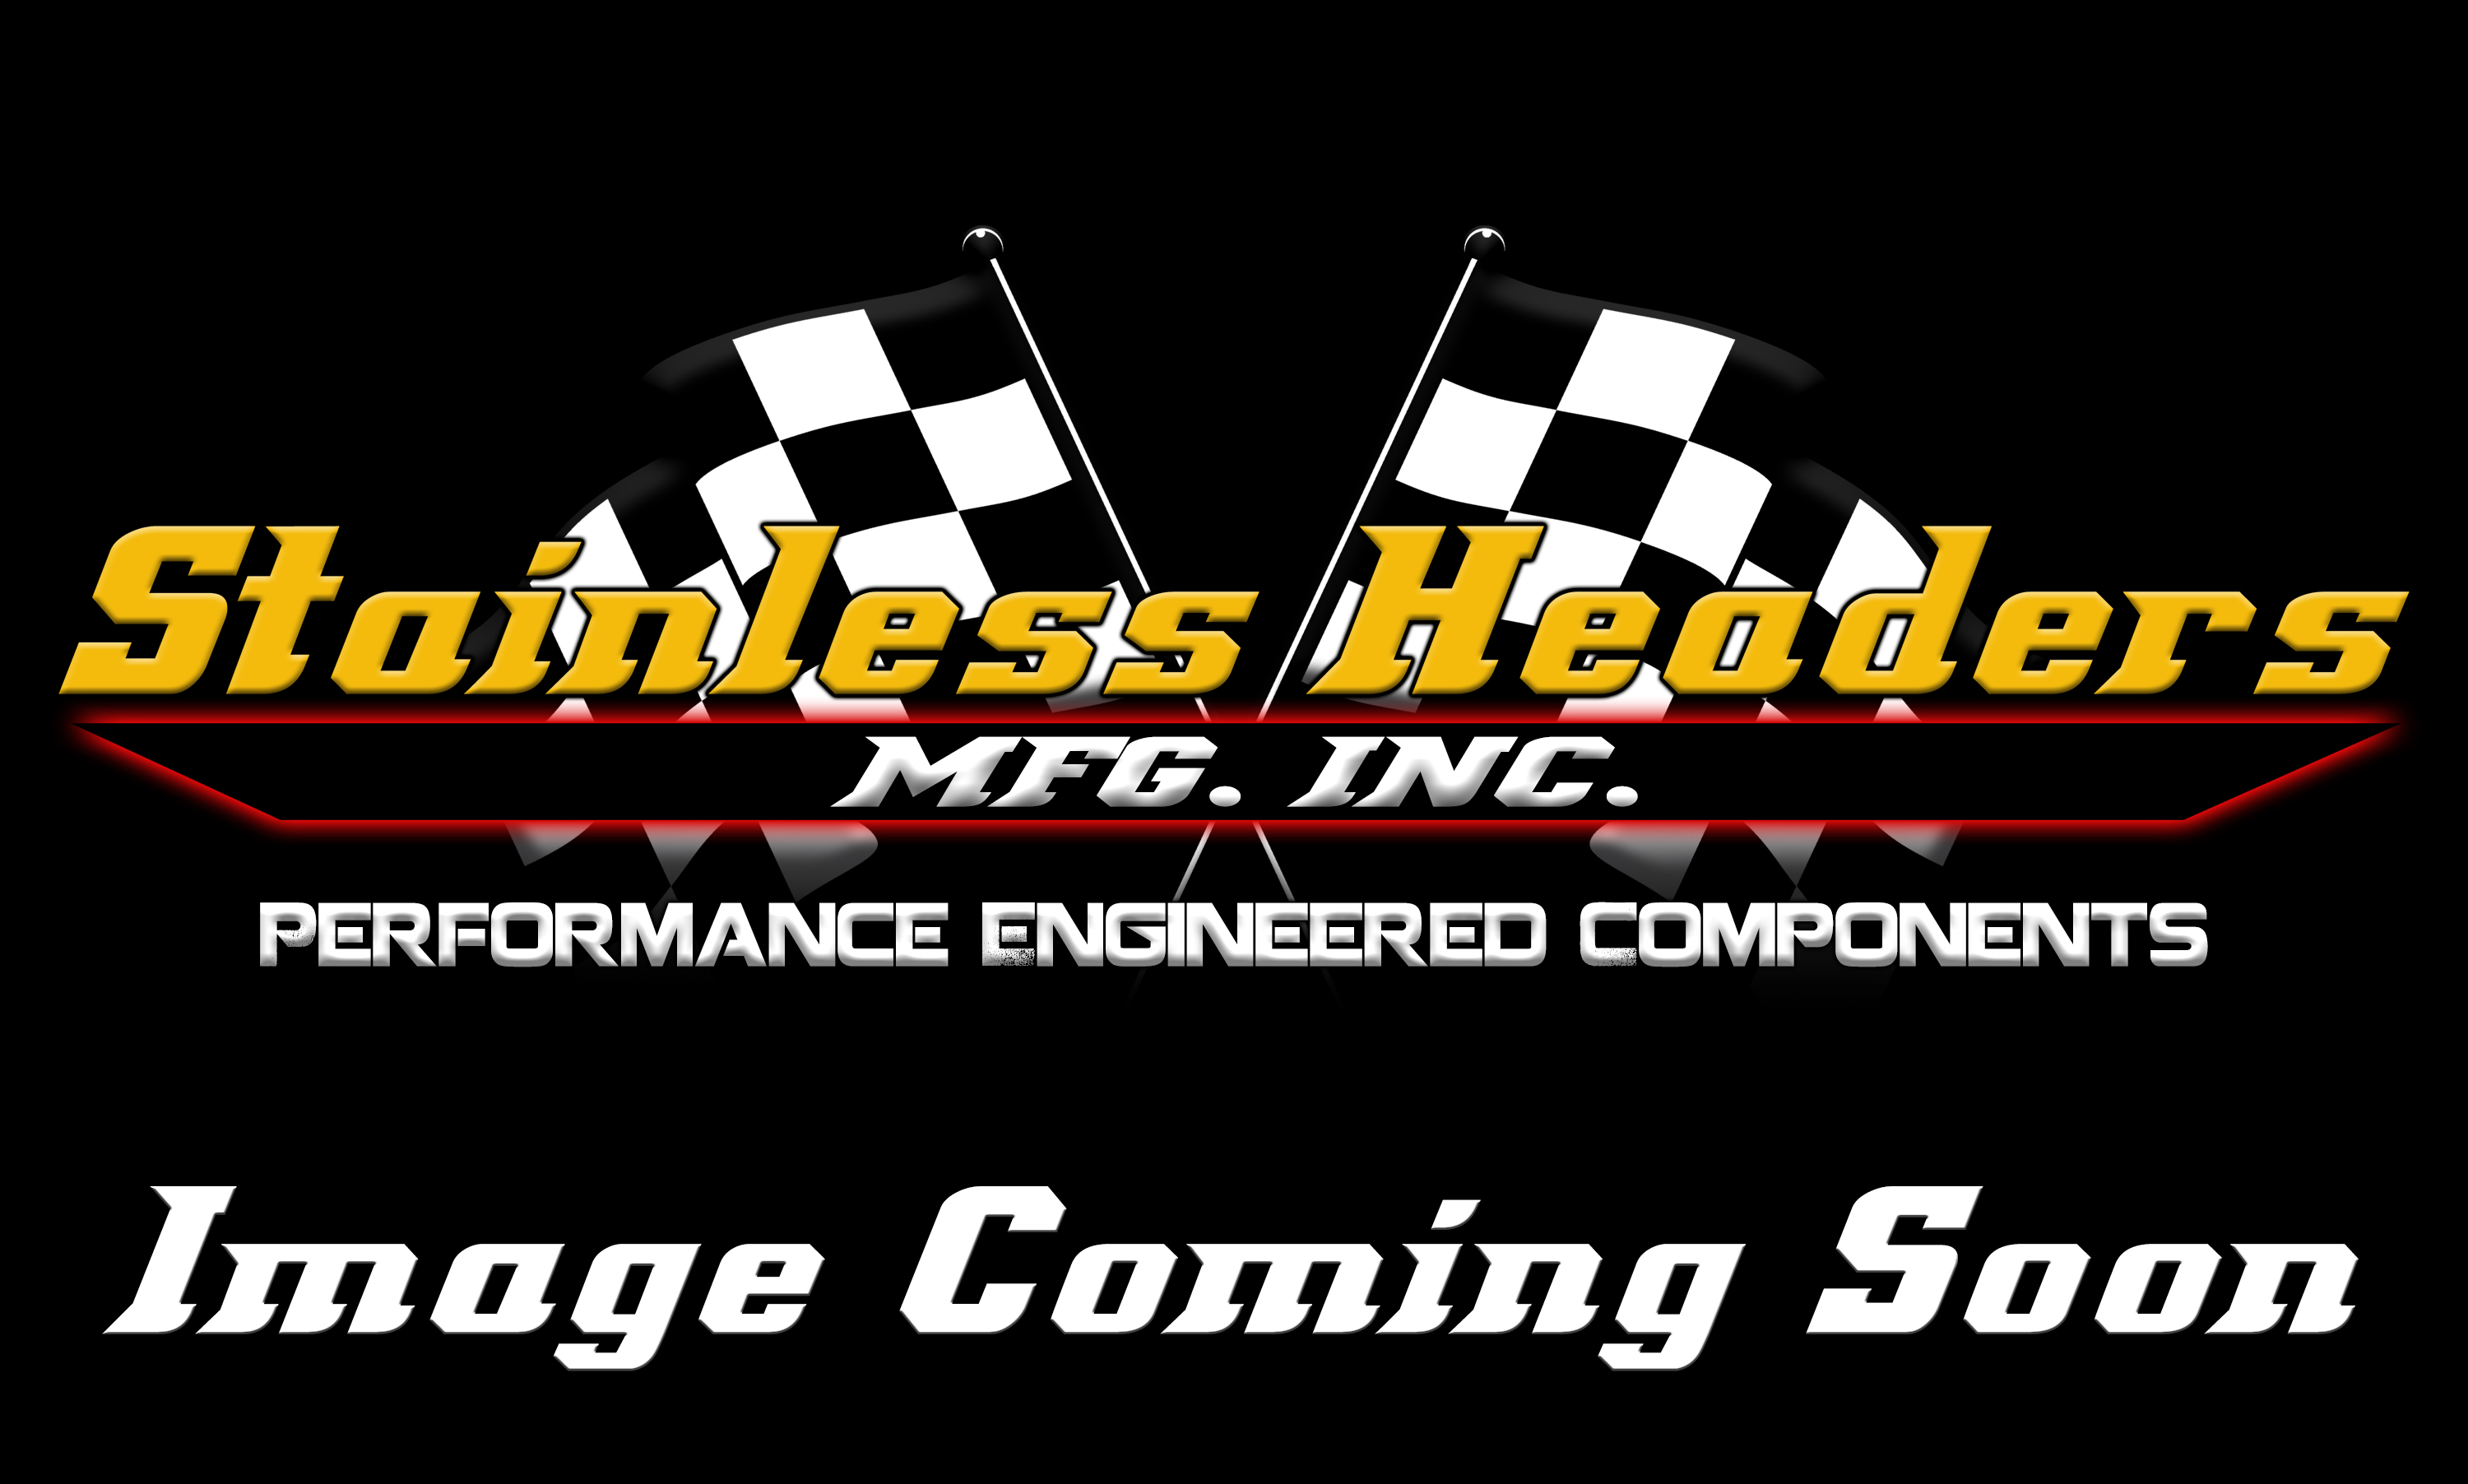 Stainless Headers - 2 1/2" Primary 2 into 1 Performance Merge Collector-16ga 321ss - Image 3